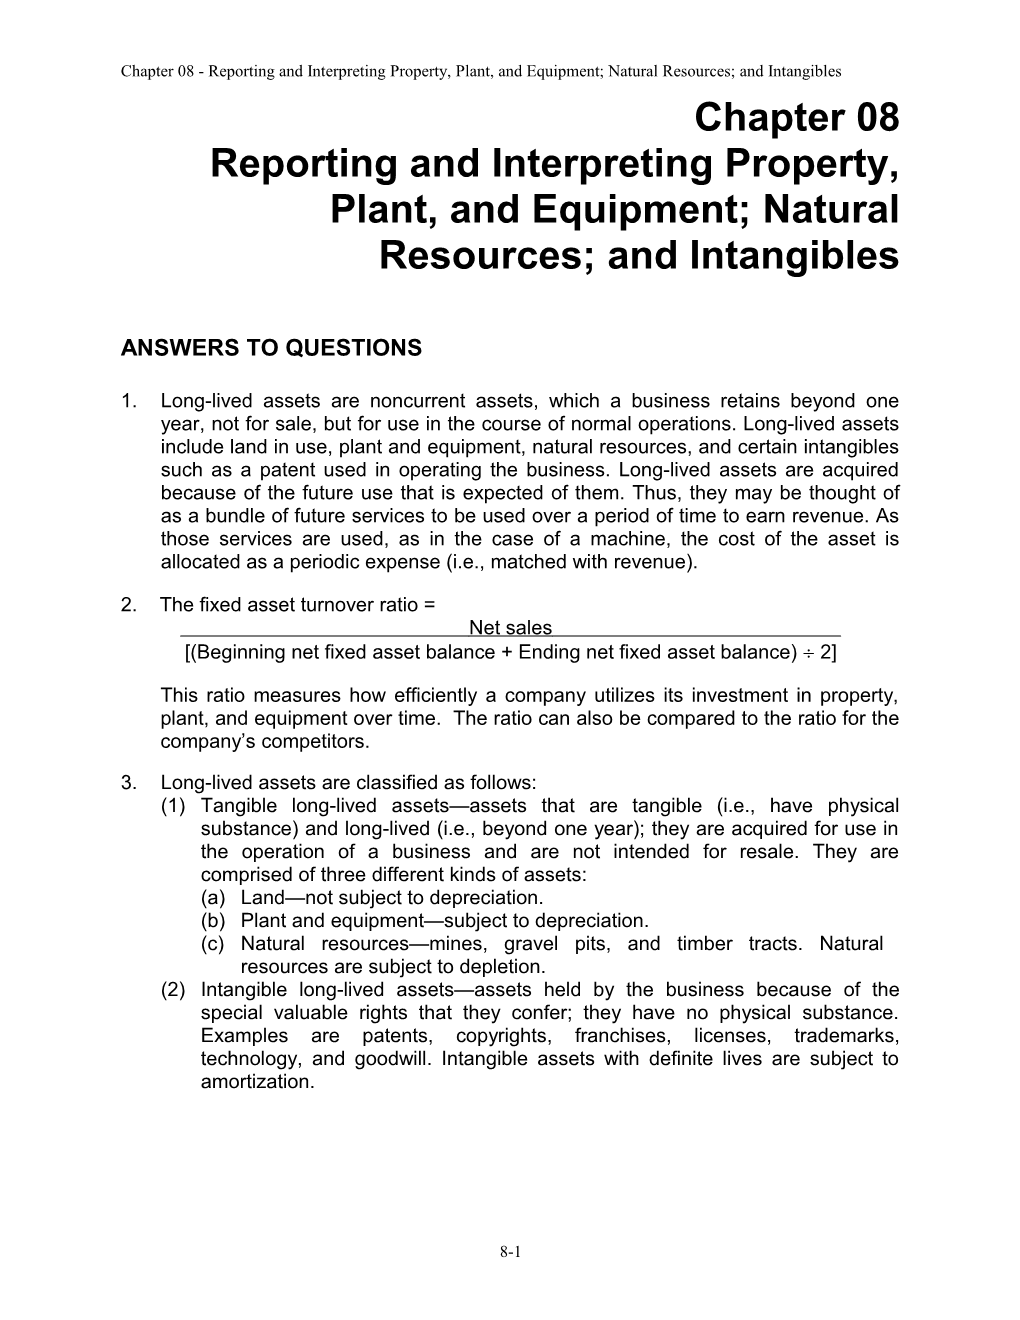 Reporting and Interpreting Property, Plant, and Equipment; Natural Resources; and Intangibles